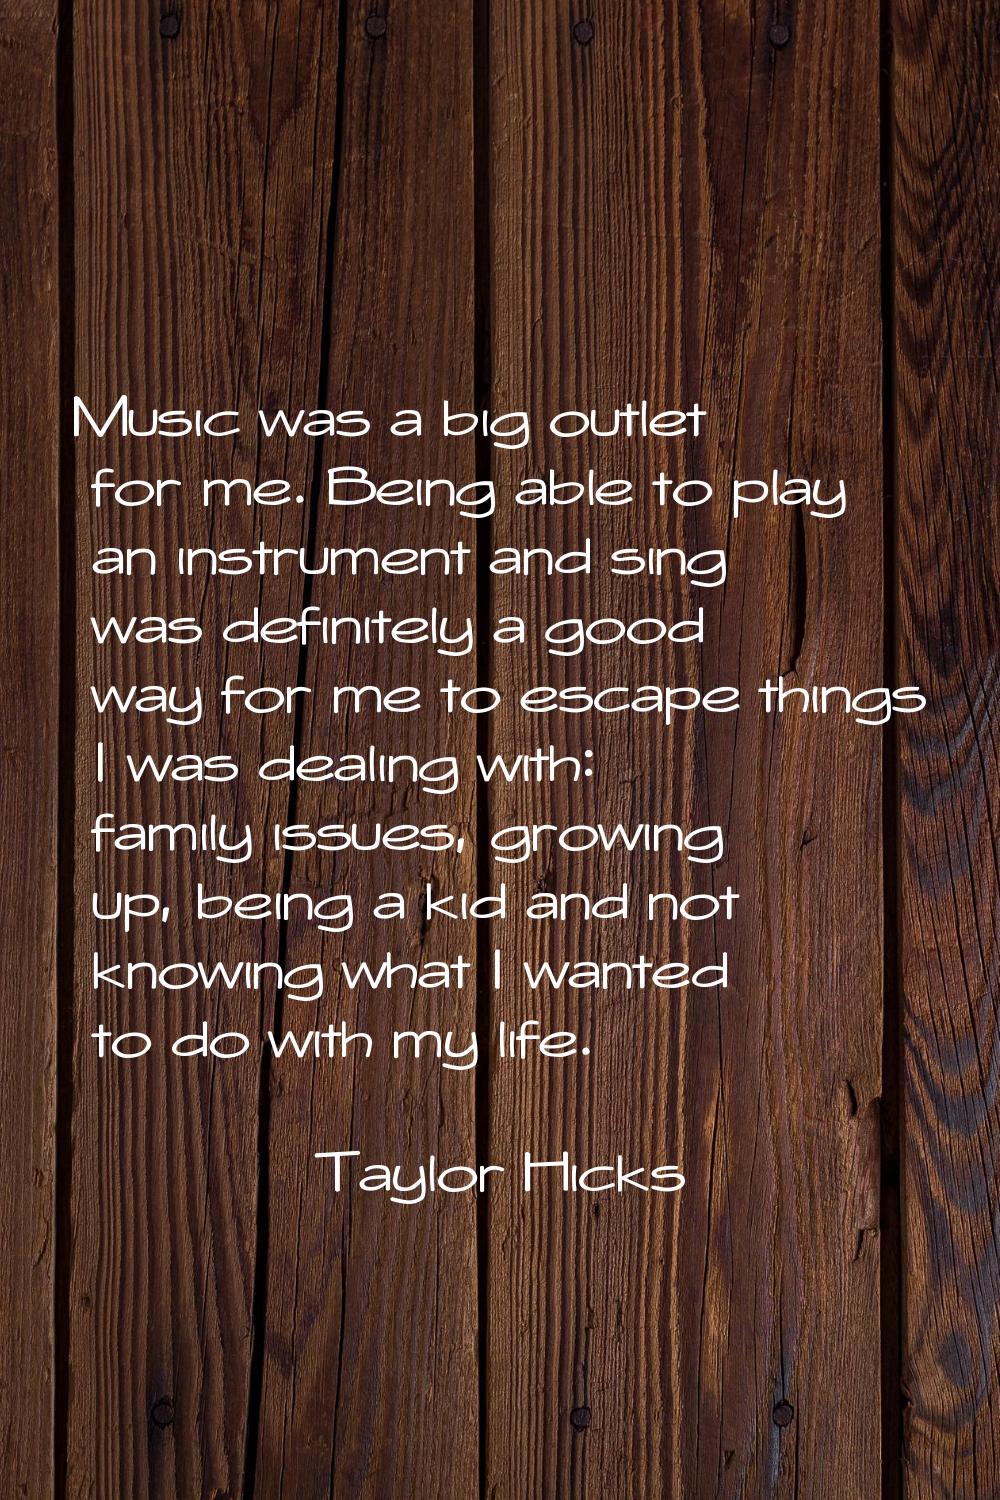 Music was a big outlet for me. Being able to play an instrument and sing was definitely a good way 